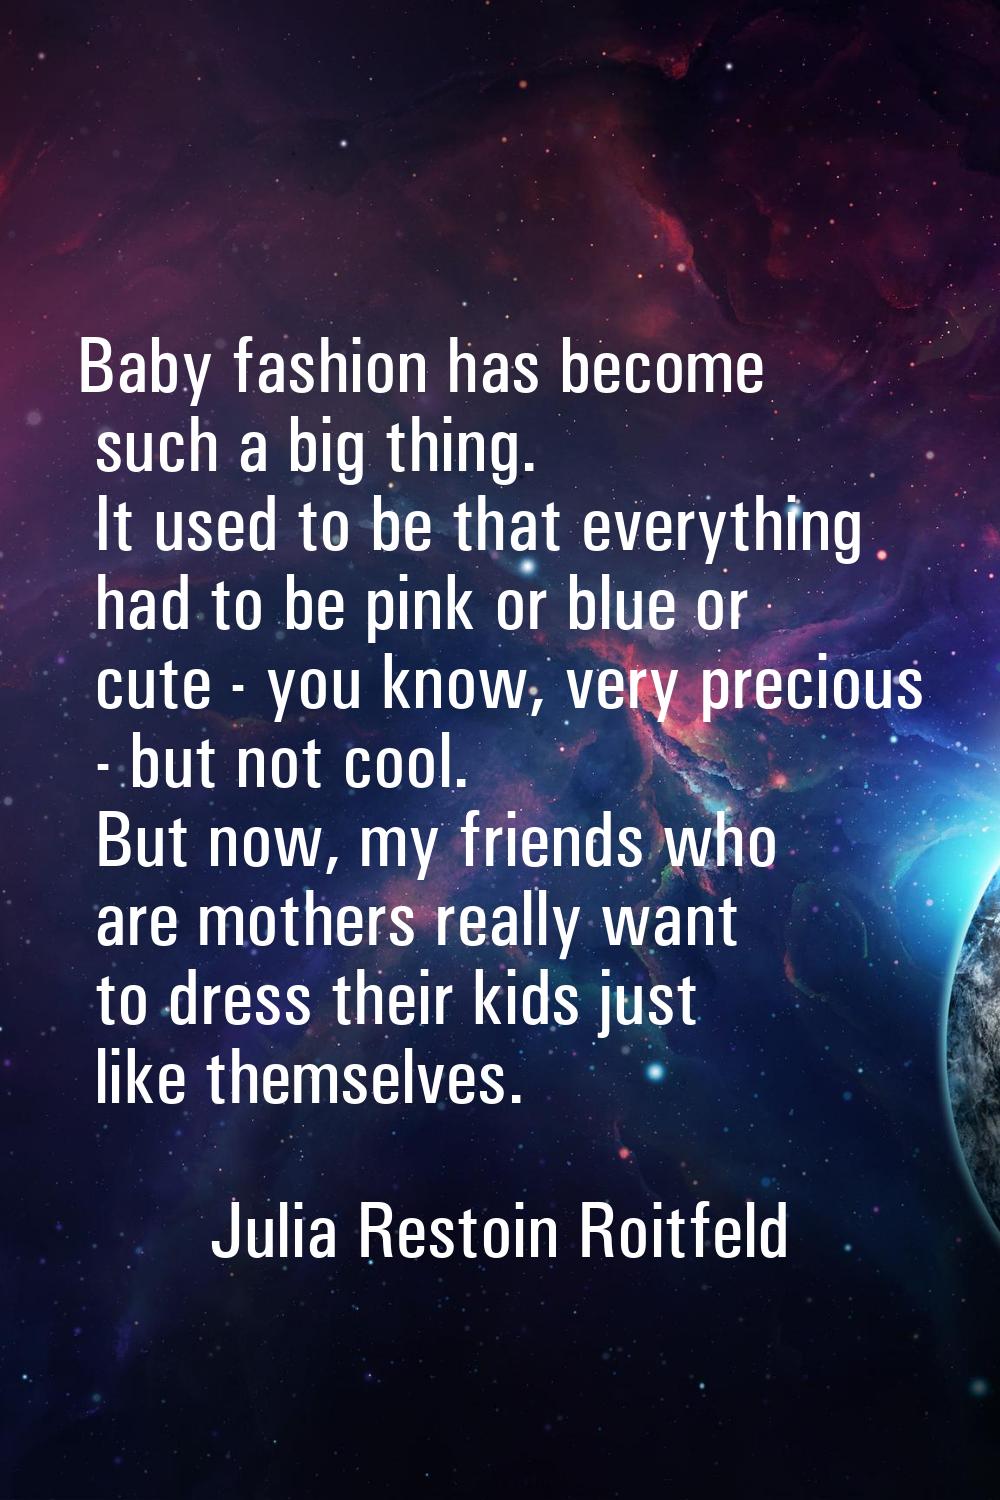 Baby fashion has become such a big thing. It used to be that everything had to be pink or blue or c